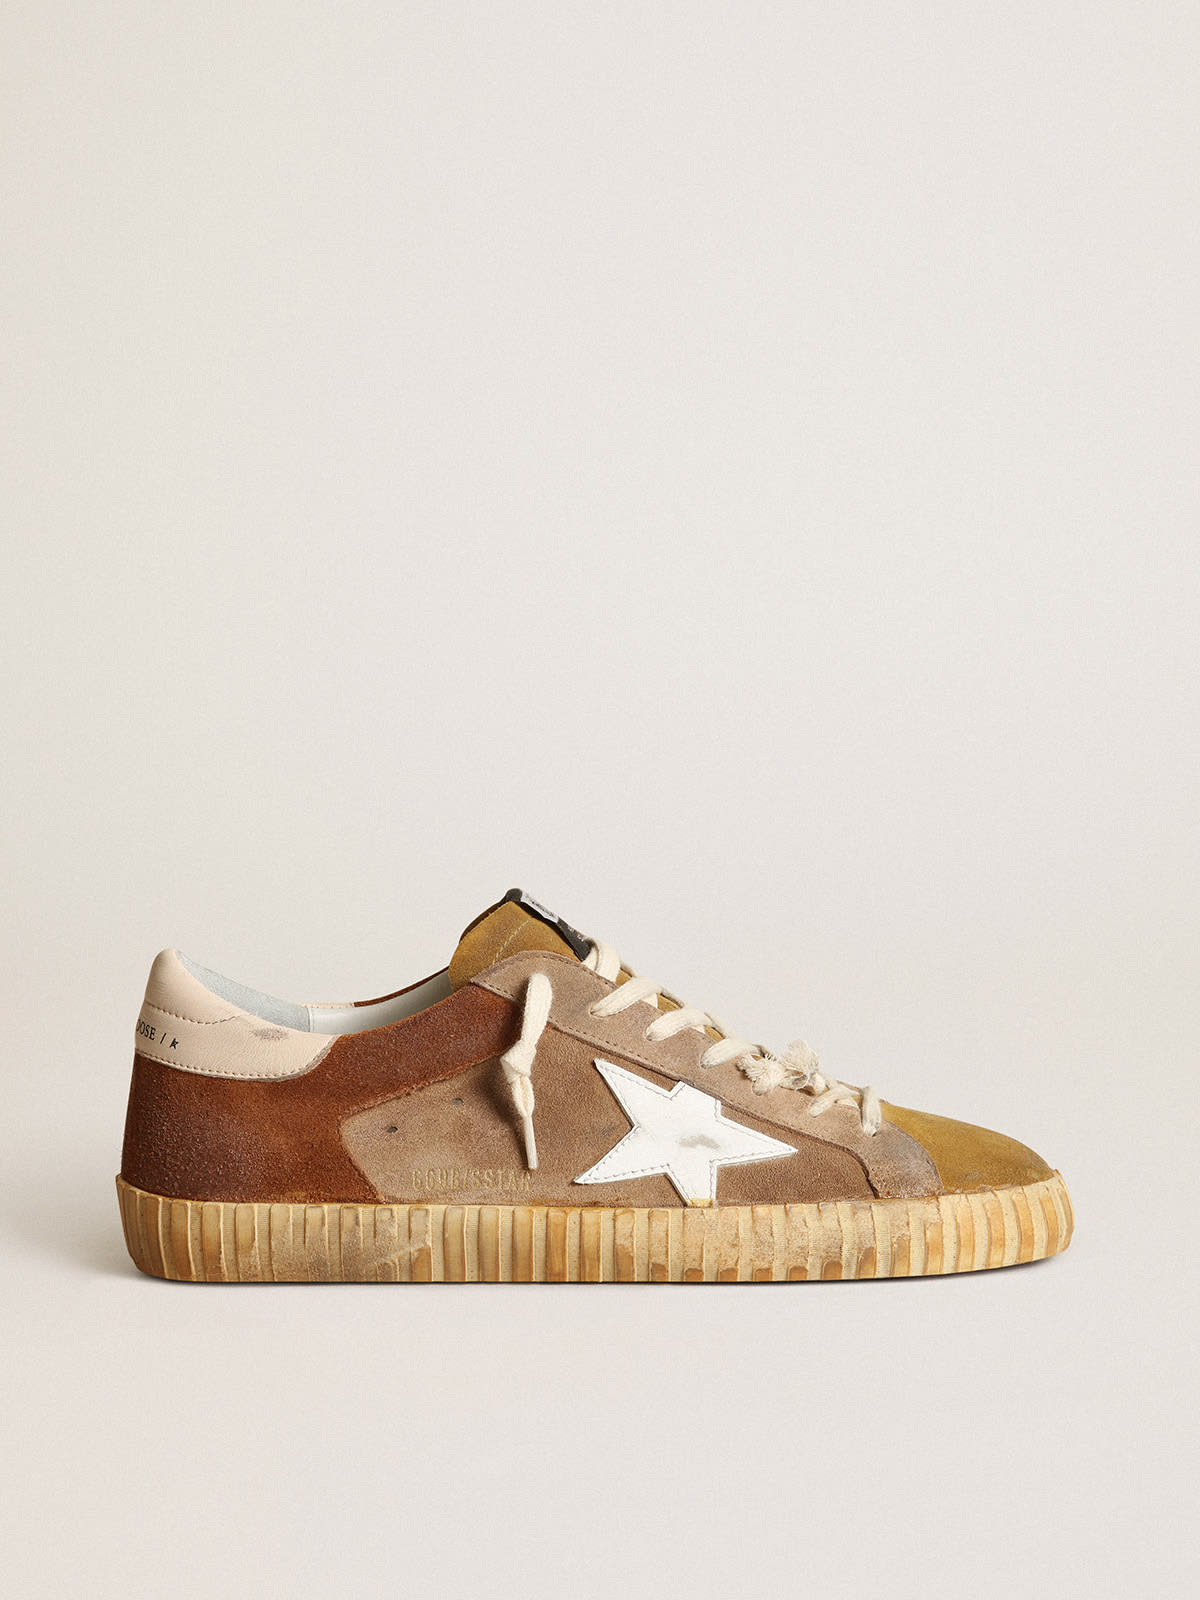 Golden Goose - Men’s Super-Star sneakers in tobacco and brown suede with white leather star in 